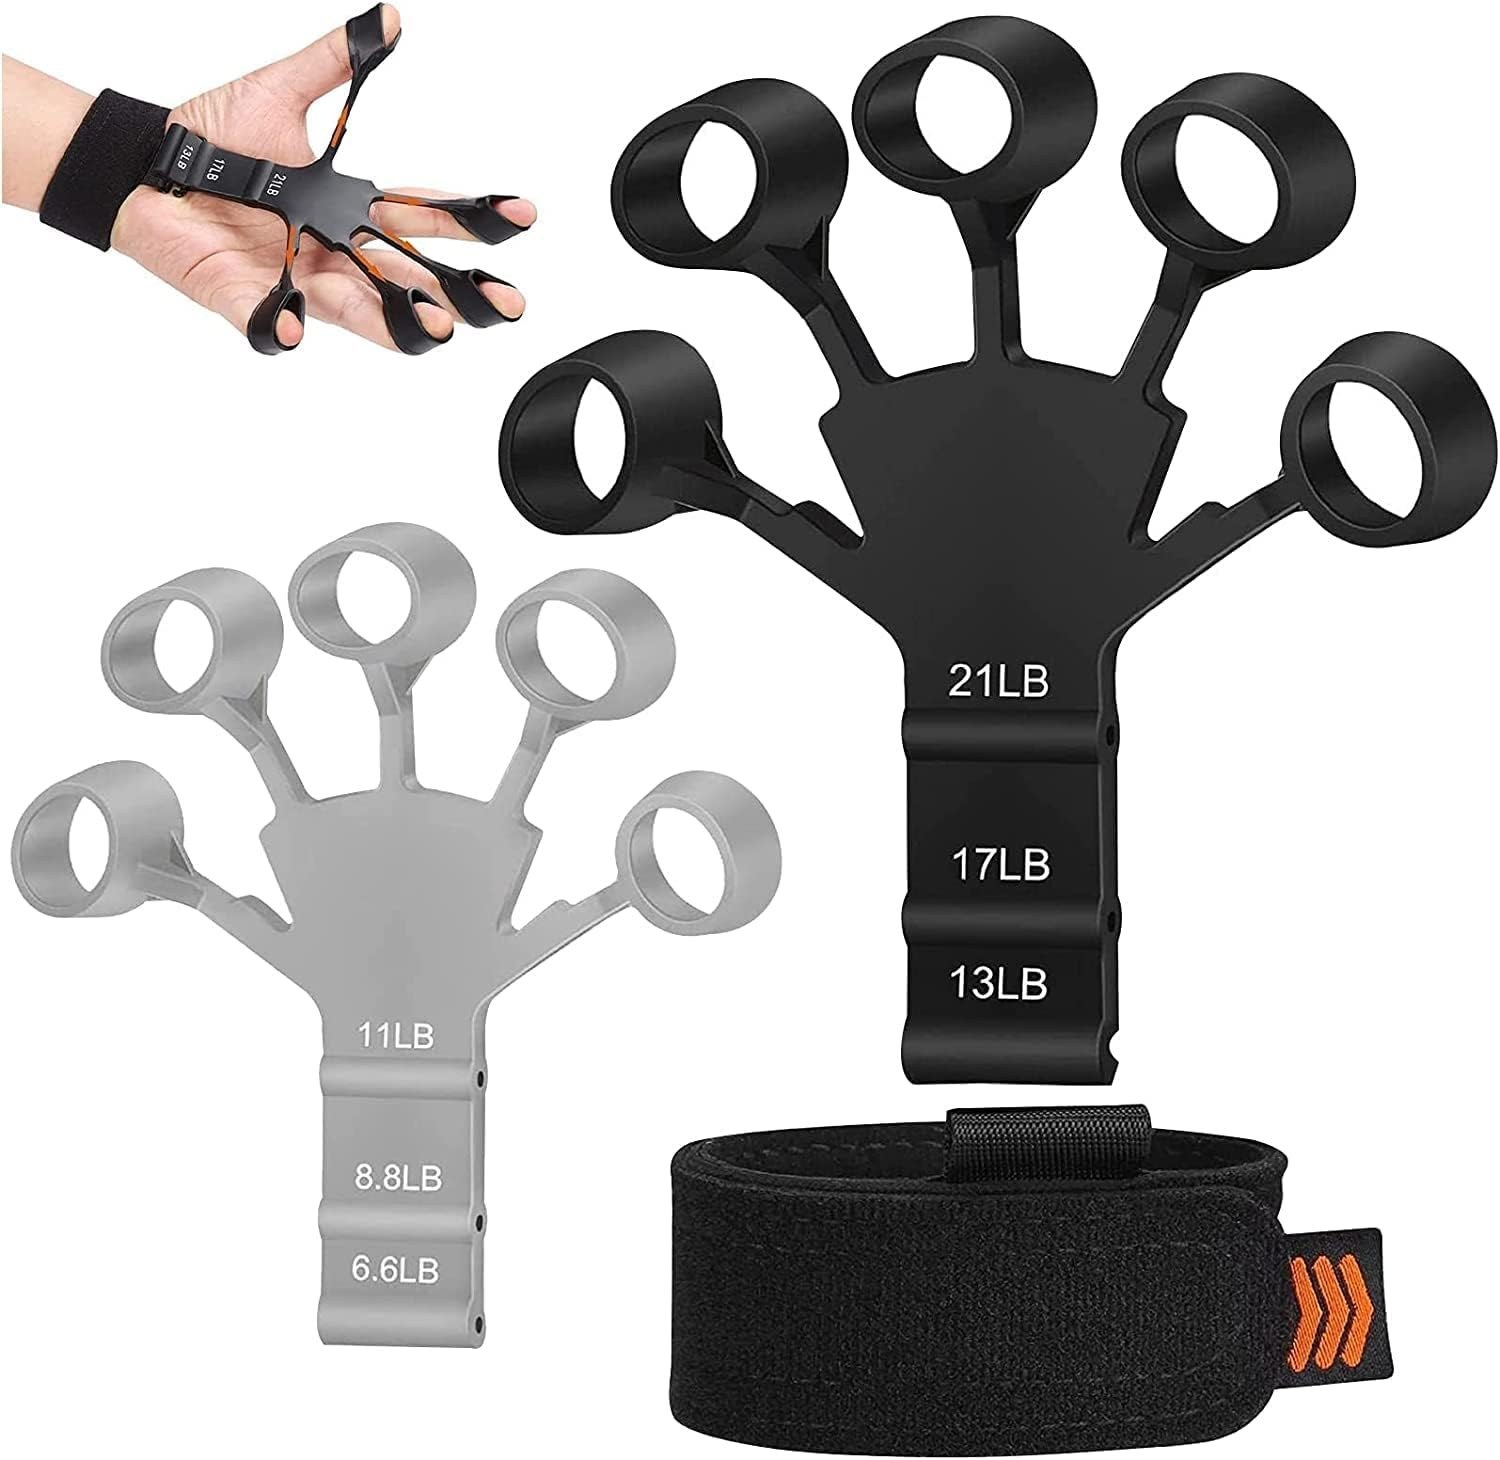 Professional Hand Grip Strengthener 200lbs-1200lbs, No Slip Metal  Adjustable Heavy-Duty Finger Stretcher with Carry Bag,Weighted Great Wrist  & Forearm